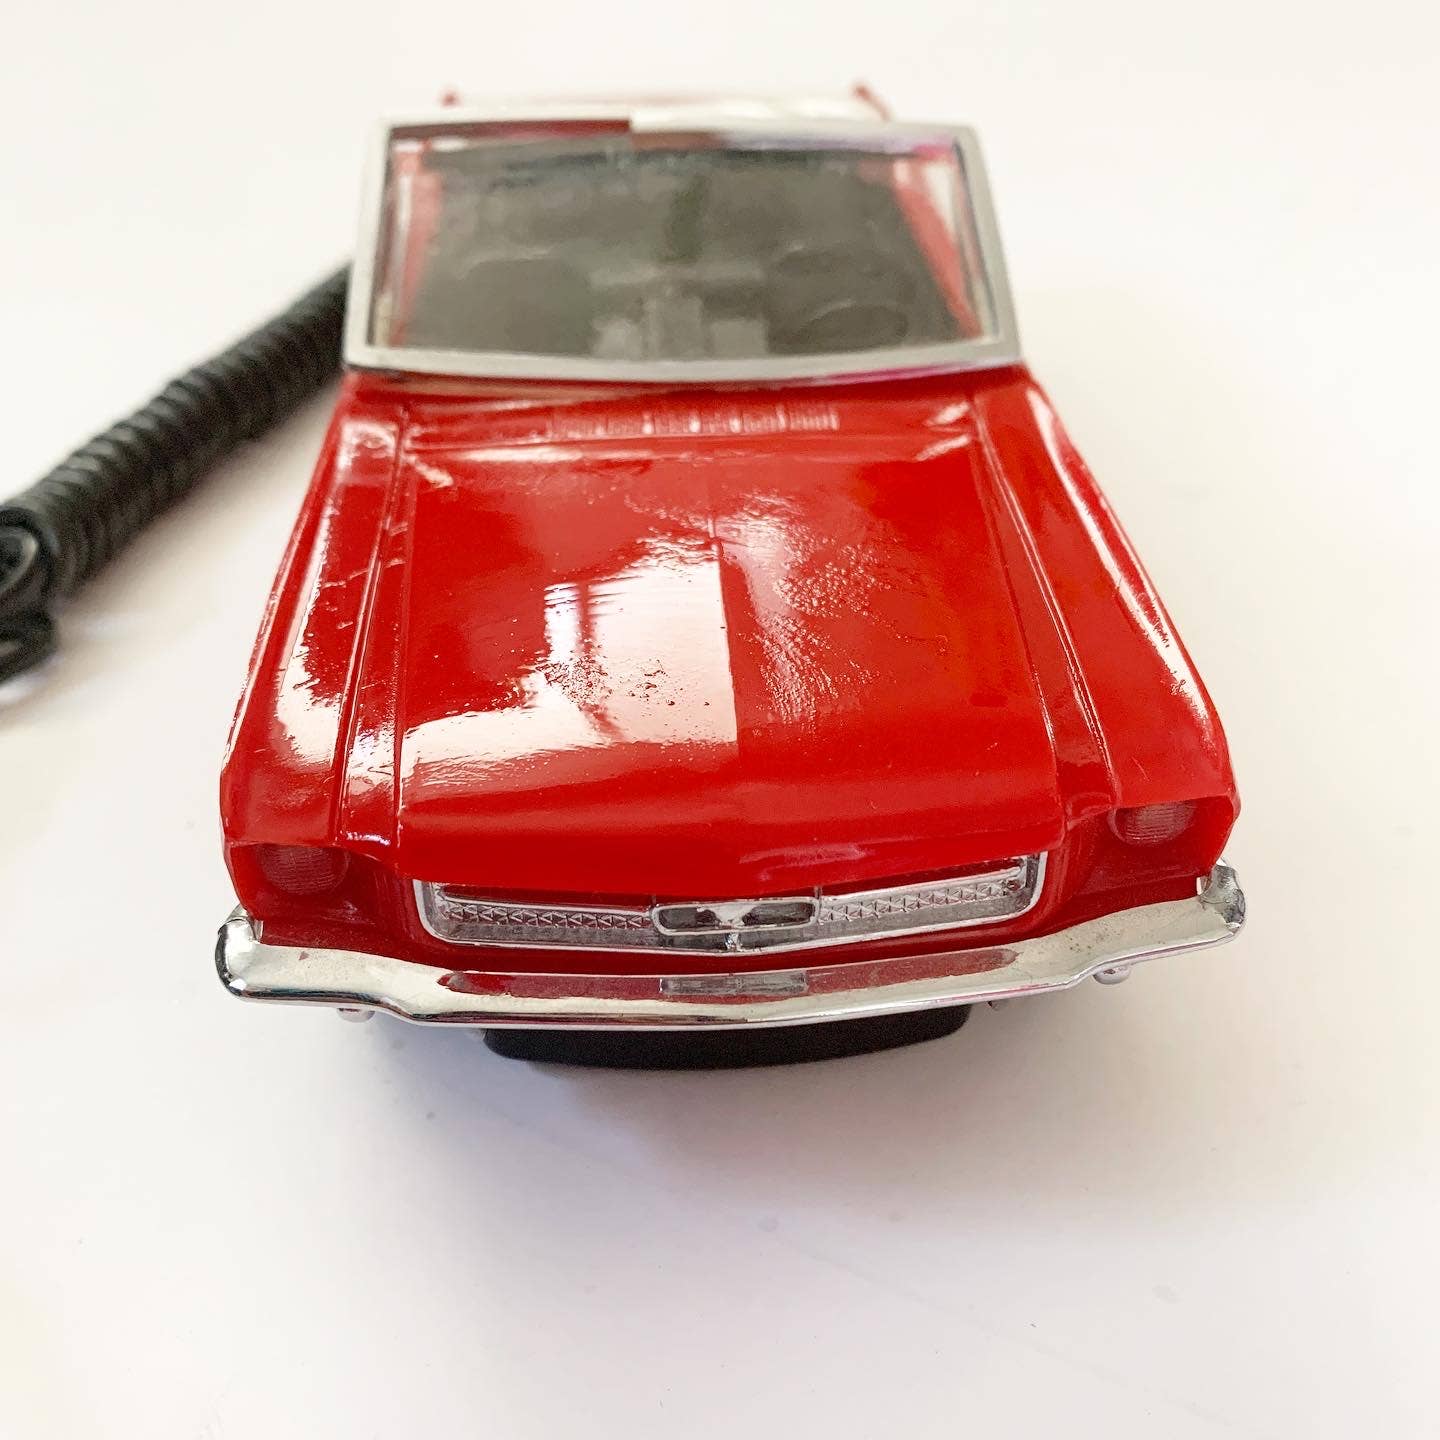 Vintage 1964 Kash N Gold Convertible Ford Mustang Novelty Red telephone